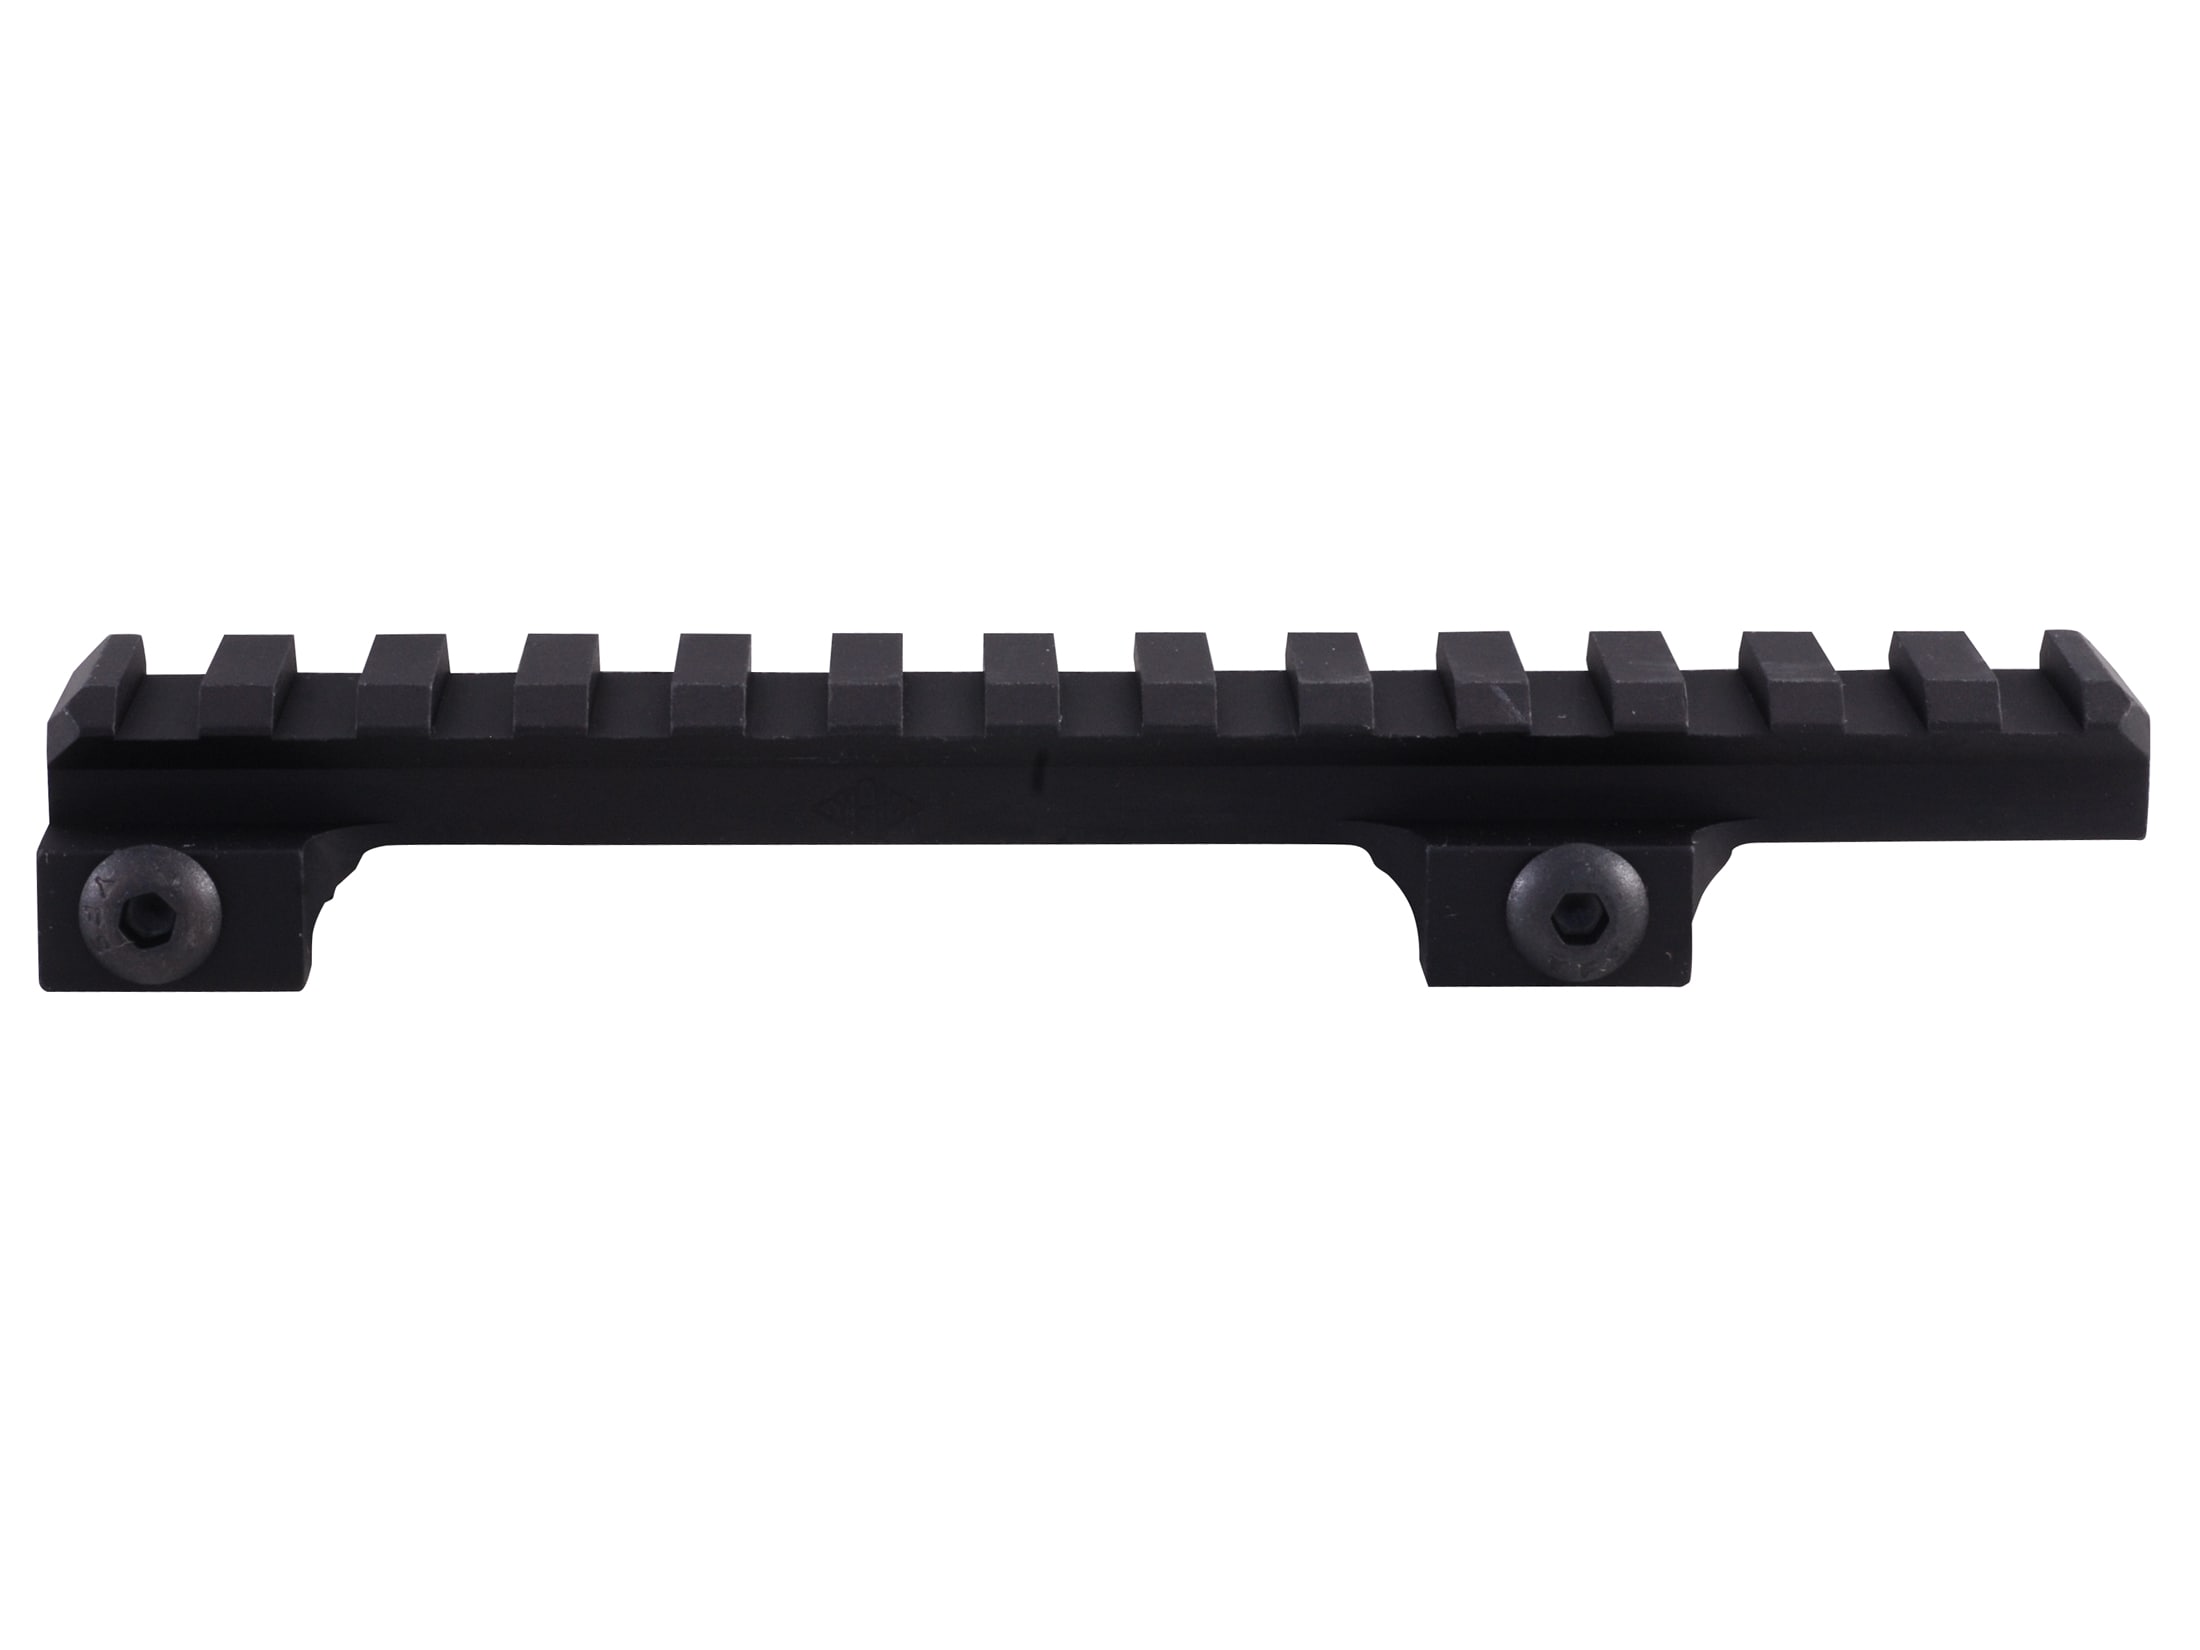 For 15 Quick Release Flat-Top 1" Riser Base Picatinny Weaver Rail Rifle Mount #9 